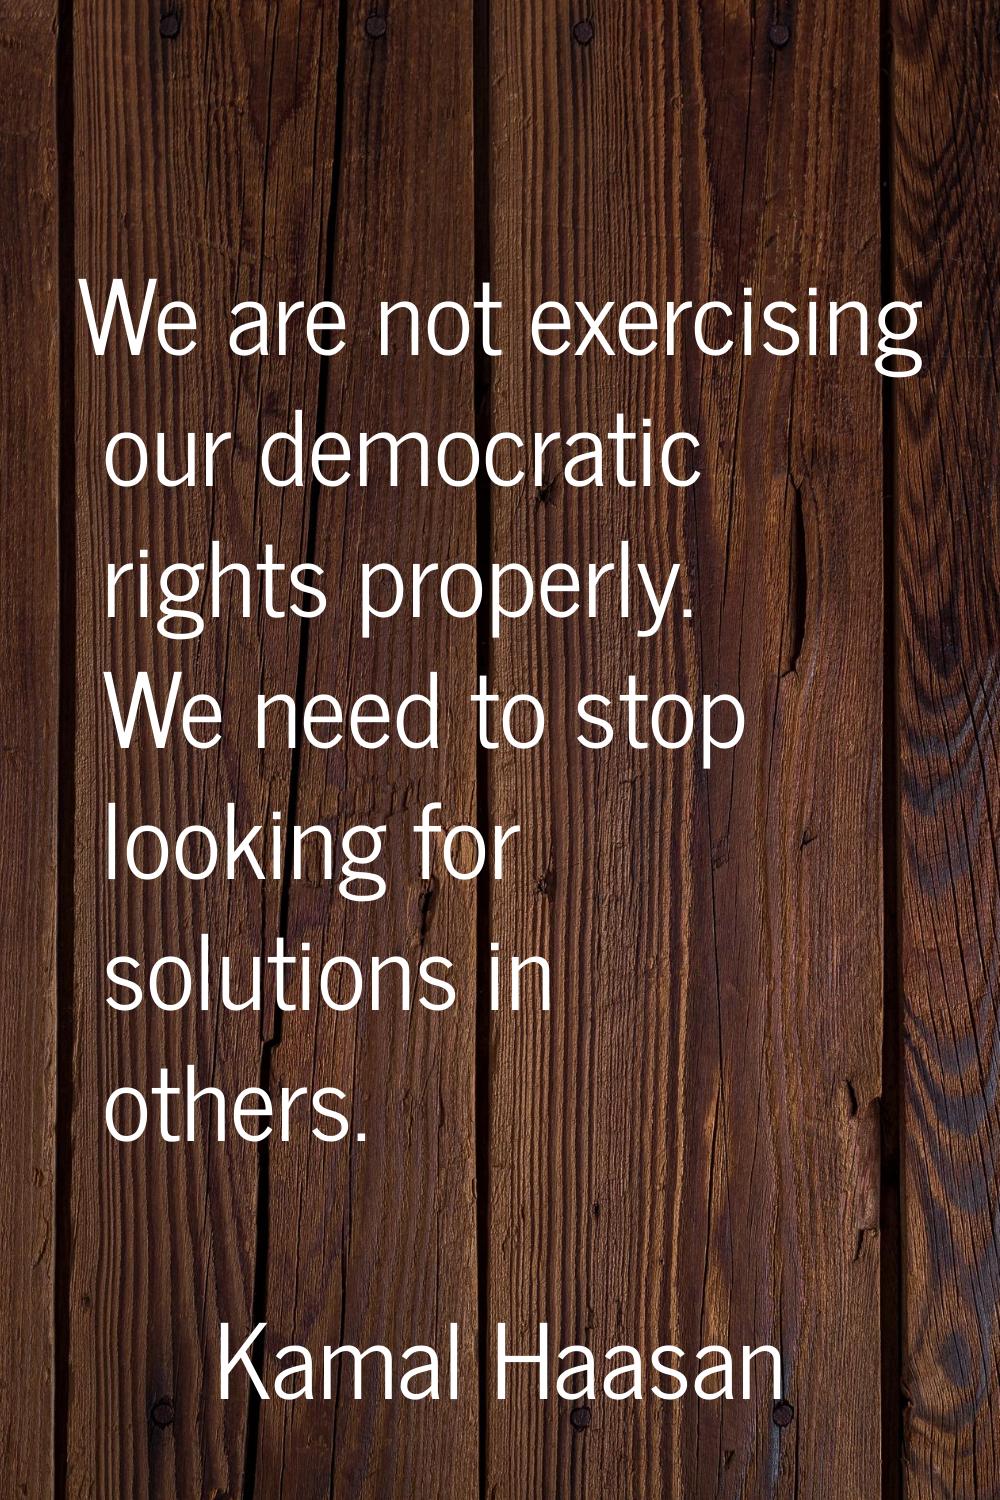 We are not exercising our democratic rights properly. We need to stop looking for solutions in othe